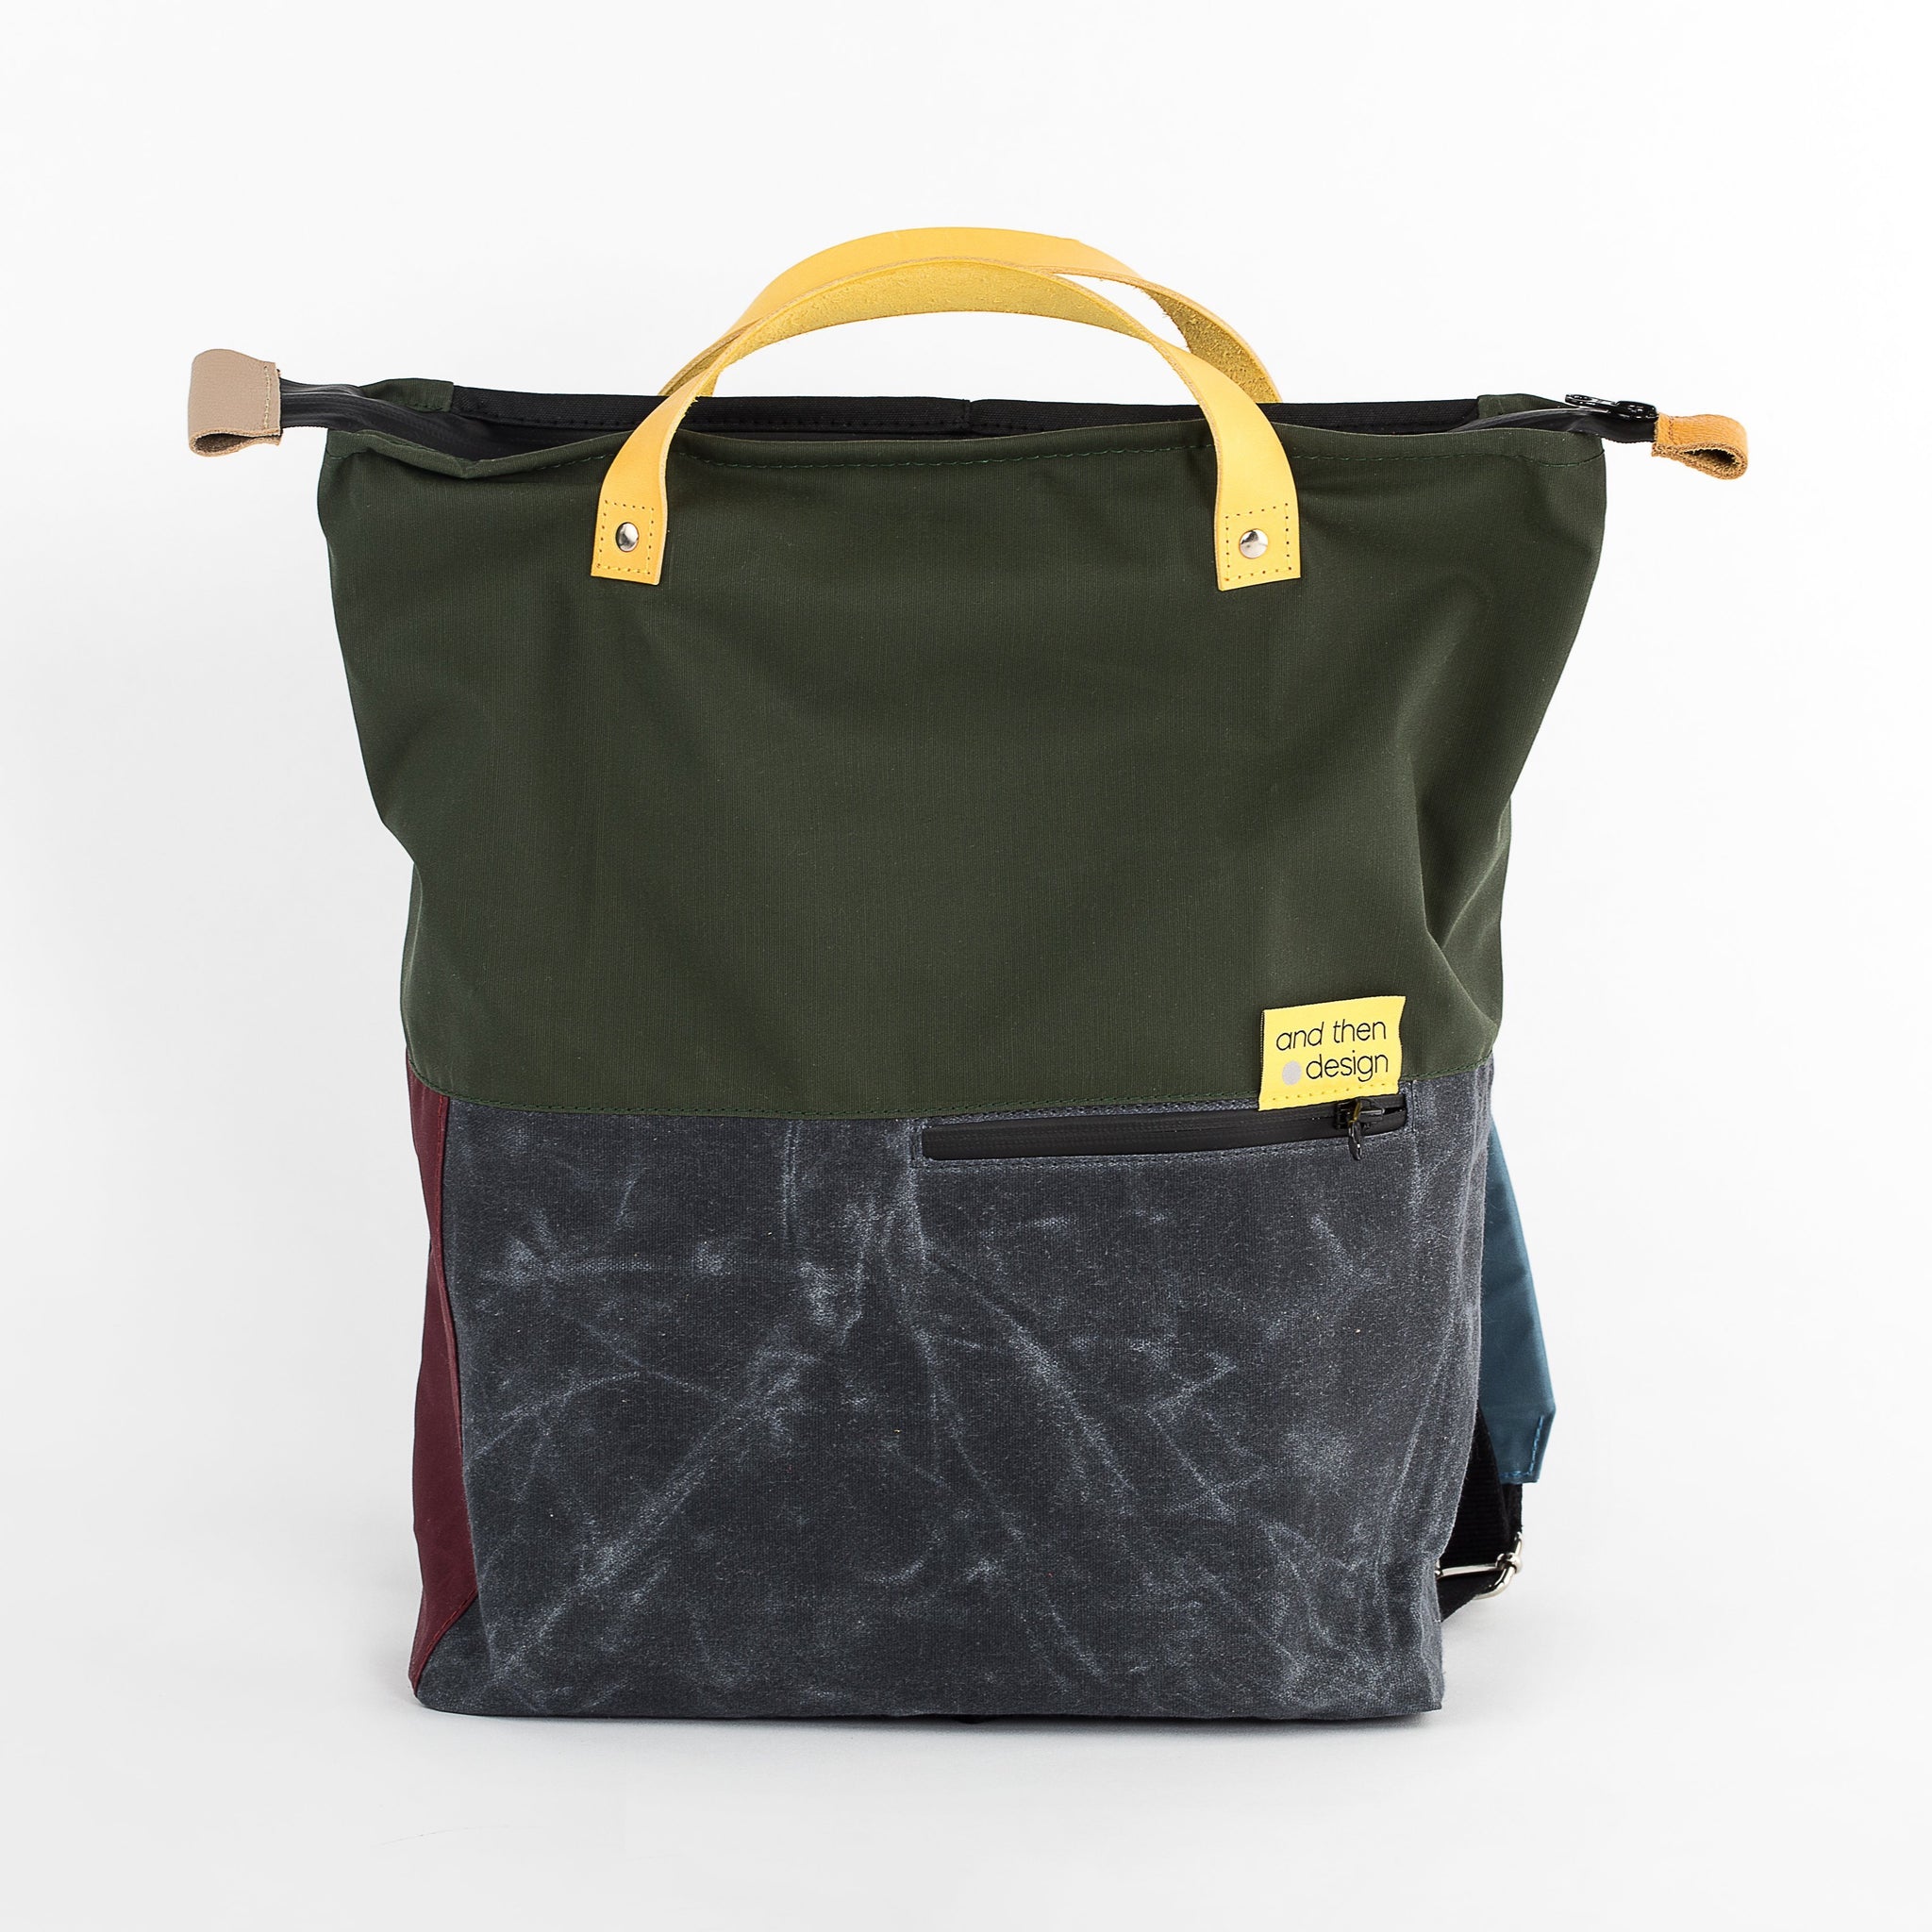 andthen.design an evolution of Vel-Oh.com-Dave | Backpack zero-1 colourblock backpack, odd straps, zero waste backpack, handmade using offcuts, waxed cotton backpack with handles